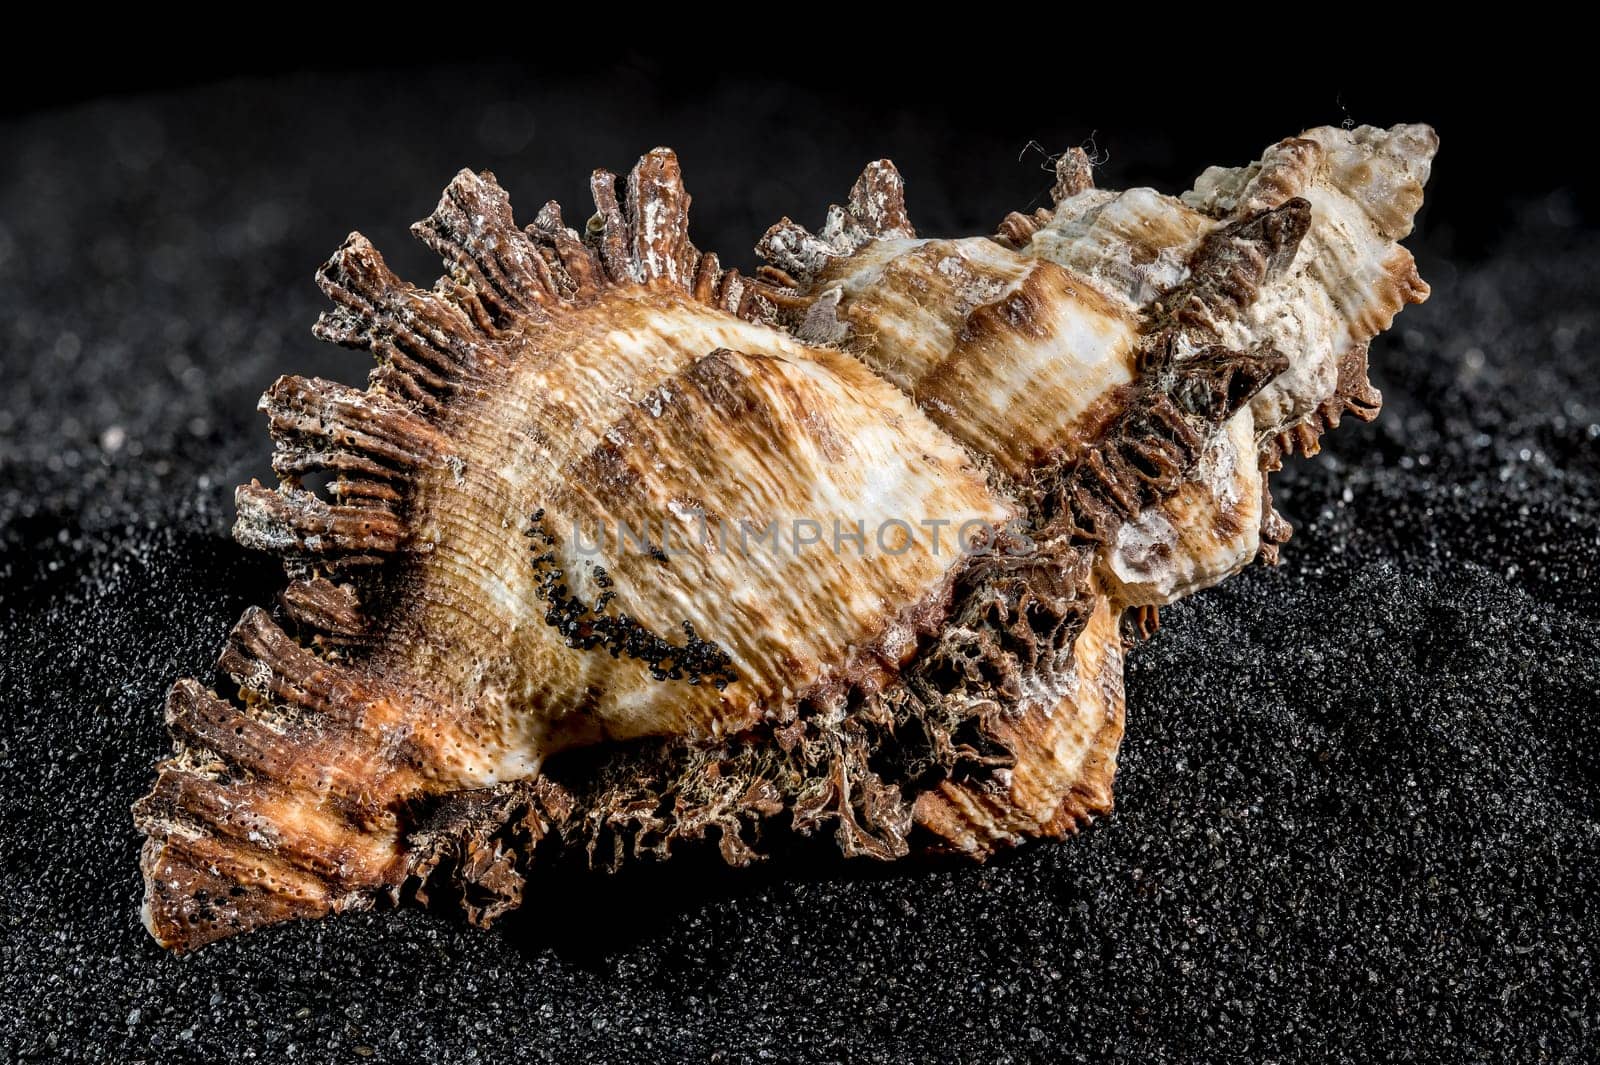 Hexaplex princeps shell on a black sand background by Multipedia